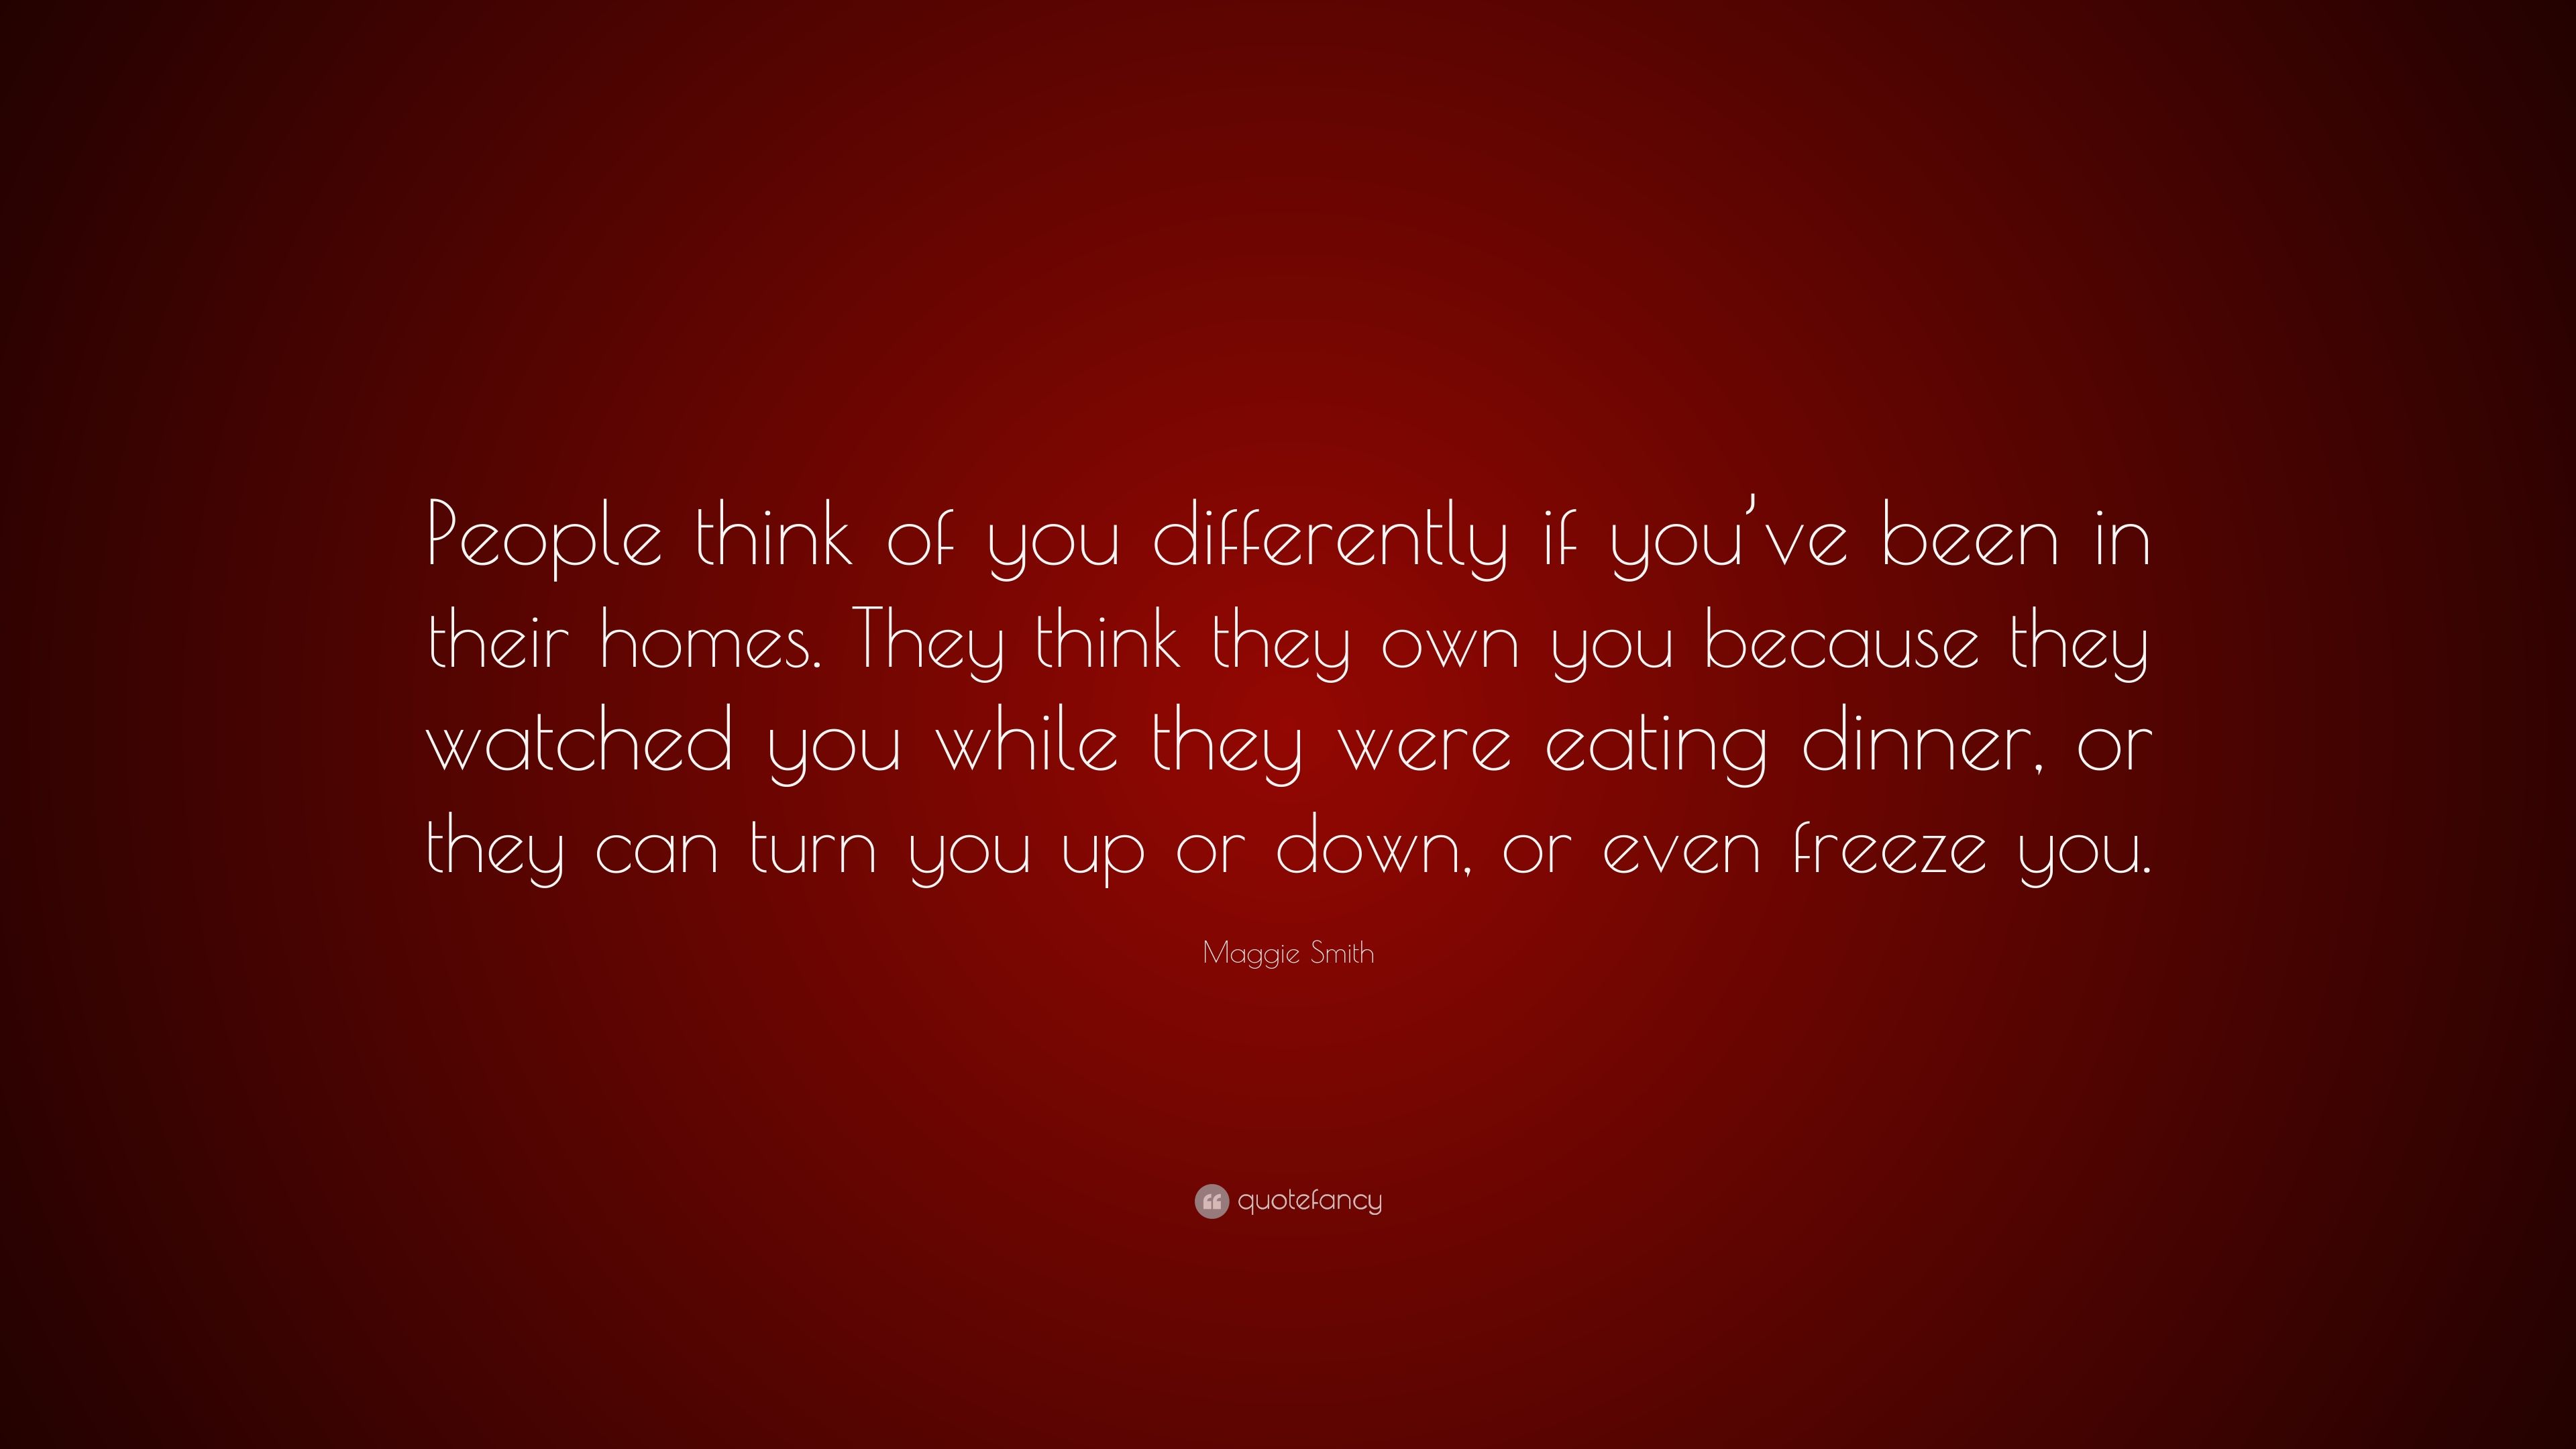 Maggie Smith Quote: “People think of you differently if you've